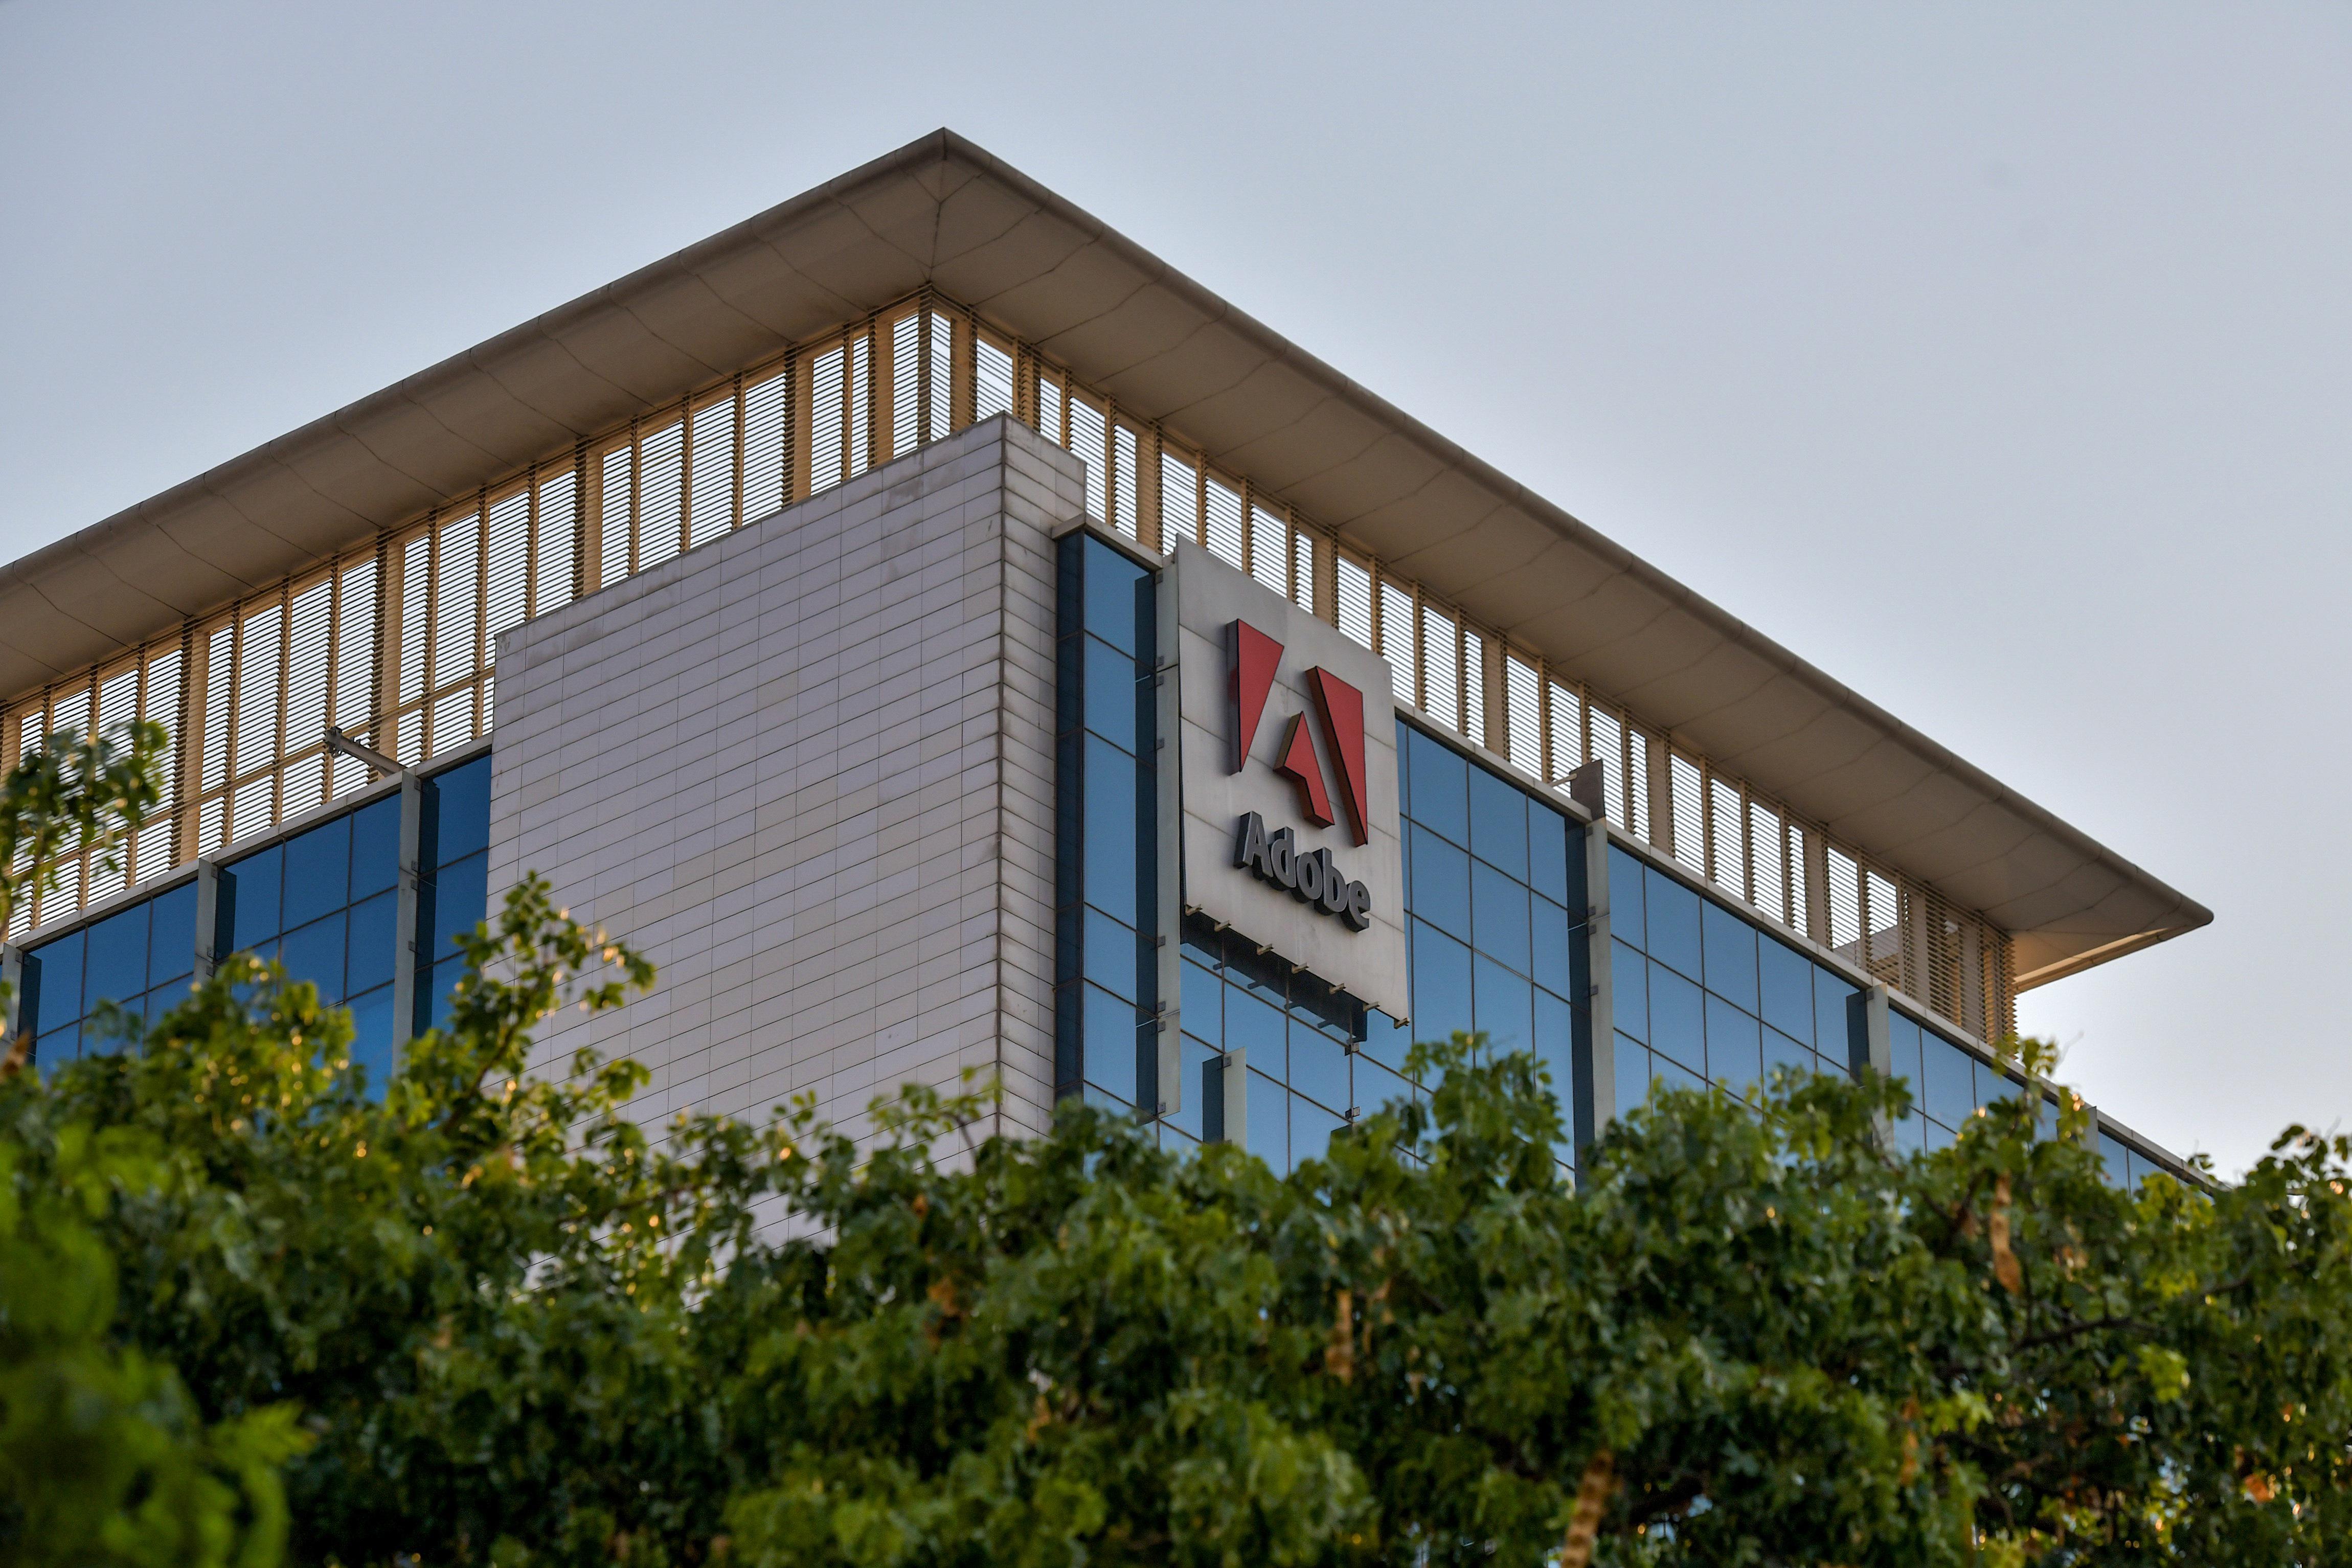 An office building with the Adobe software company logo